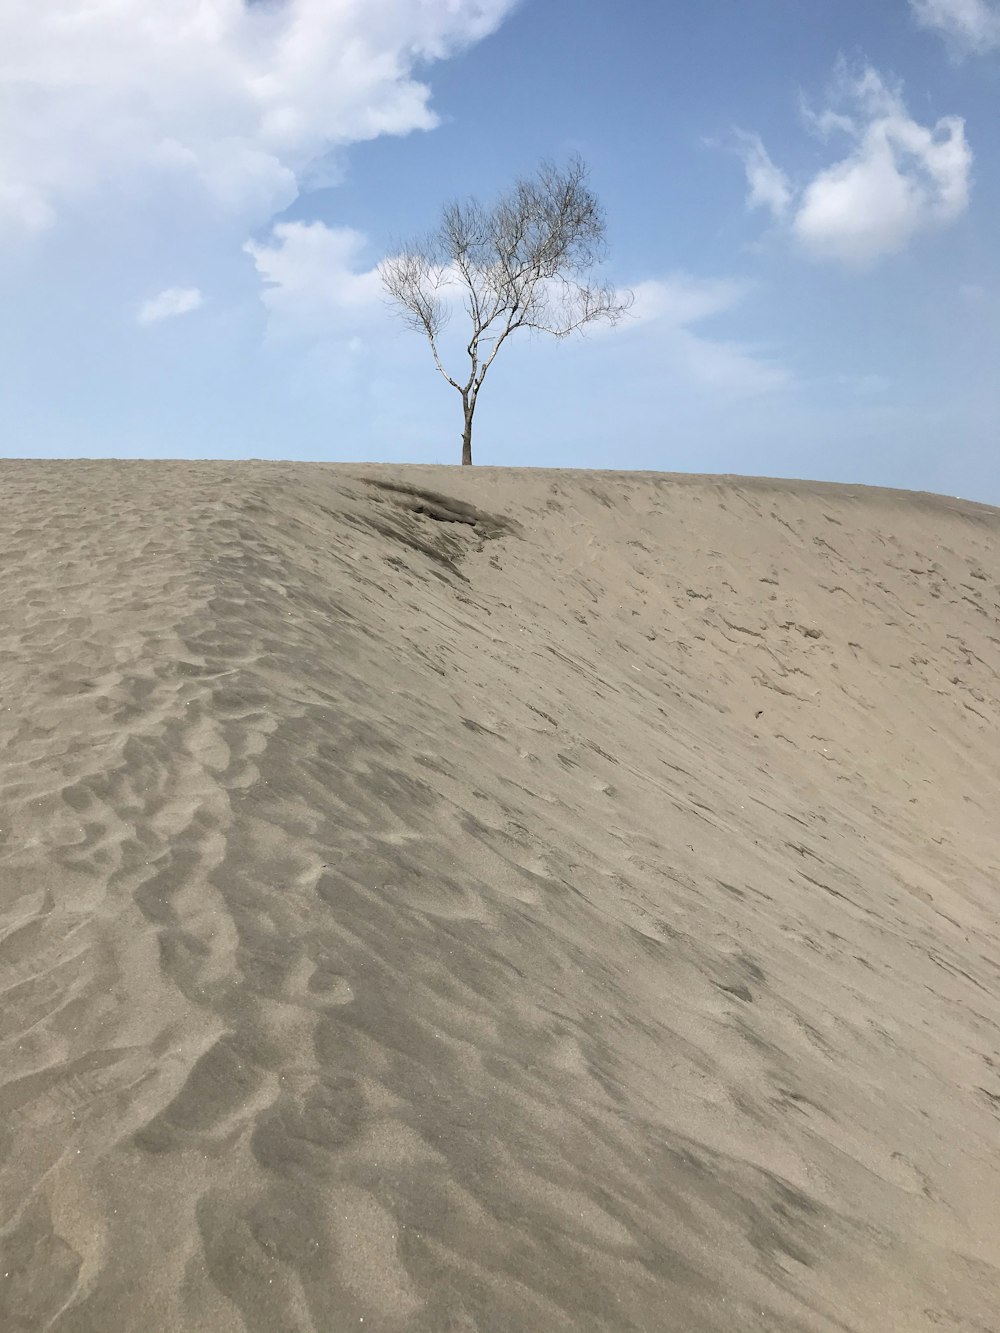 leafless tree on brown sand under blue sky during daytime